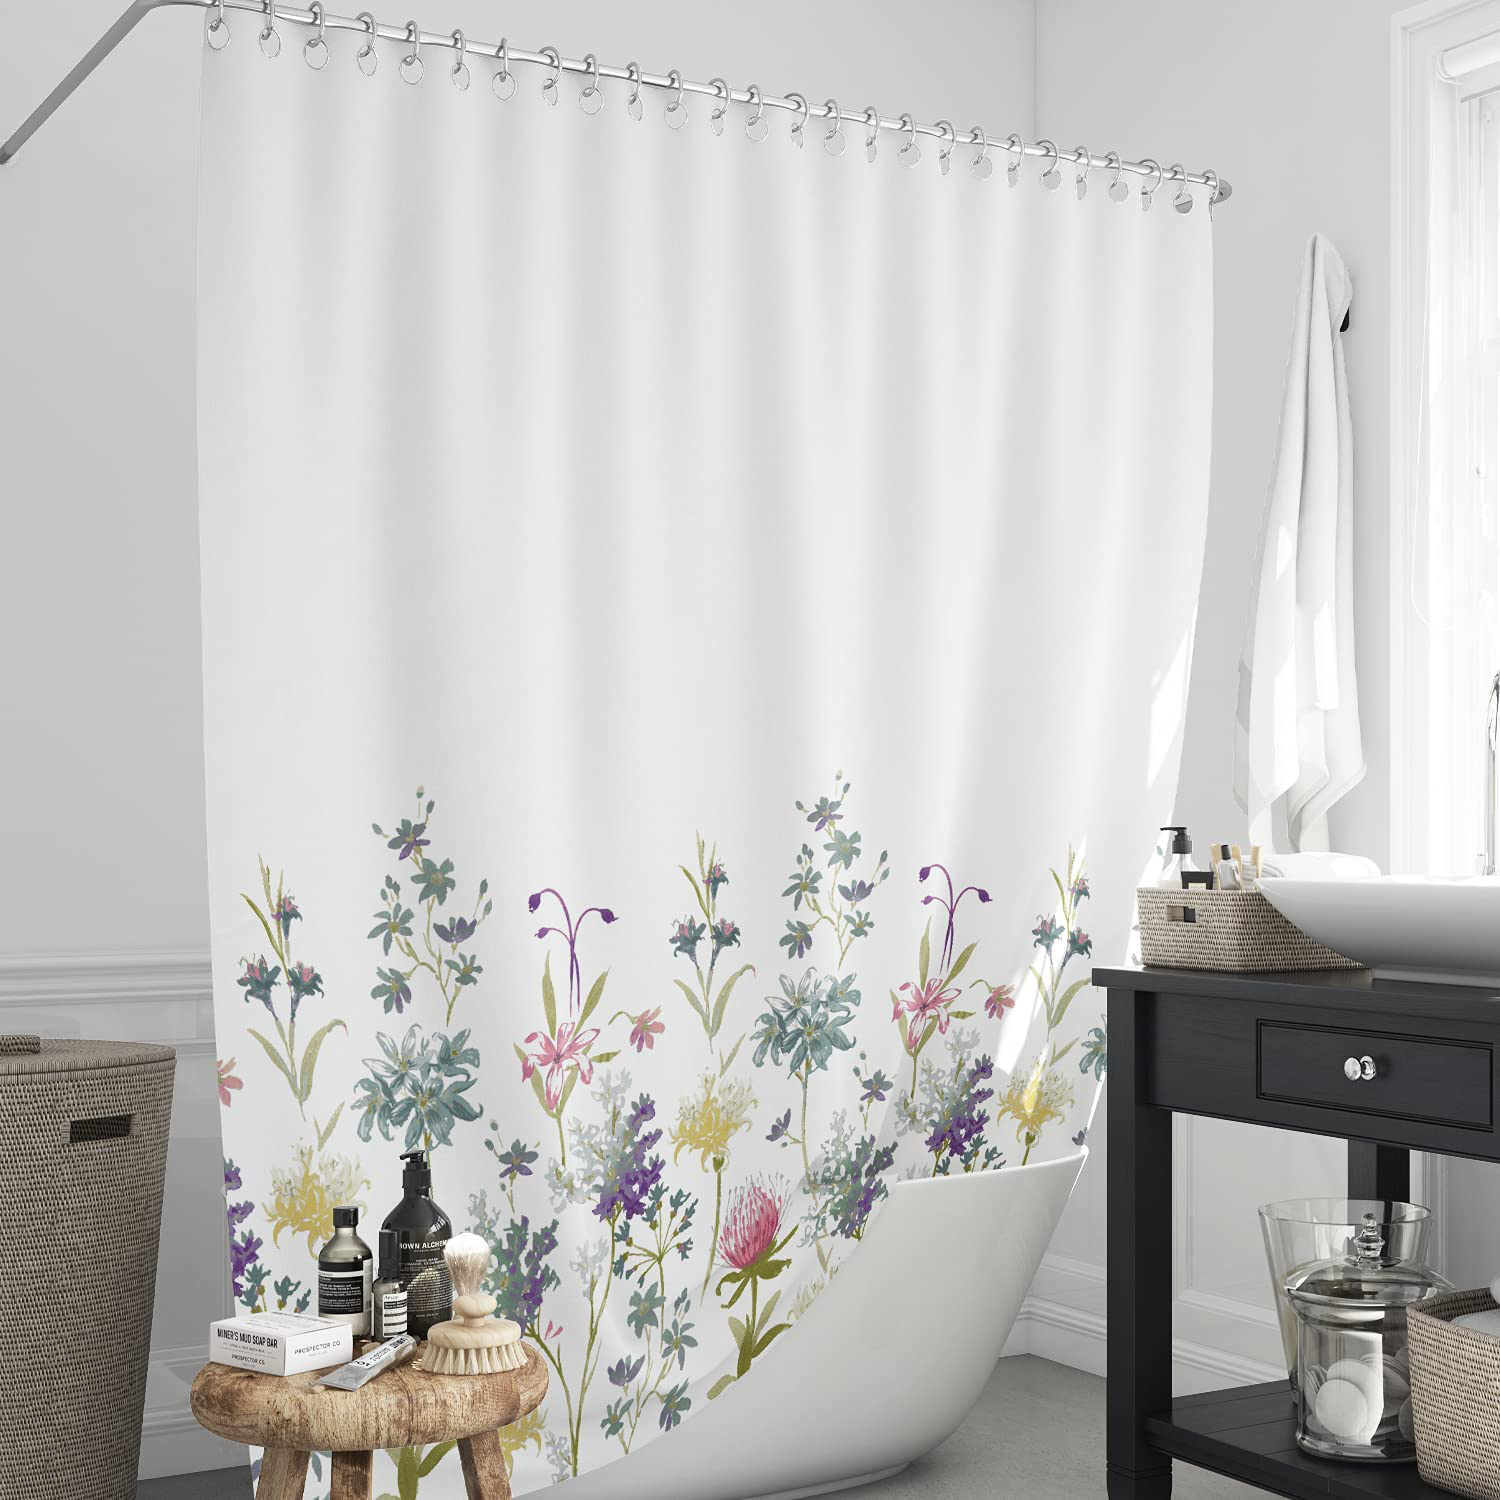 Boston Linen Co. Cotton Blend Polyester Twill Weave Fabric Shower Curtain for Bathroom 